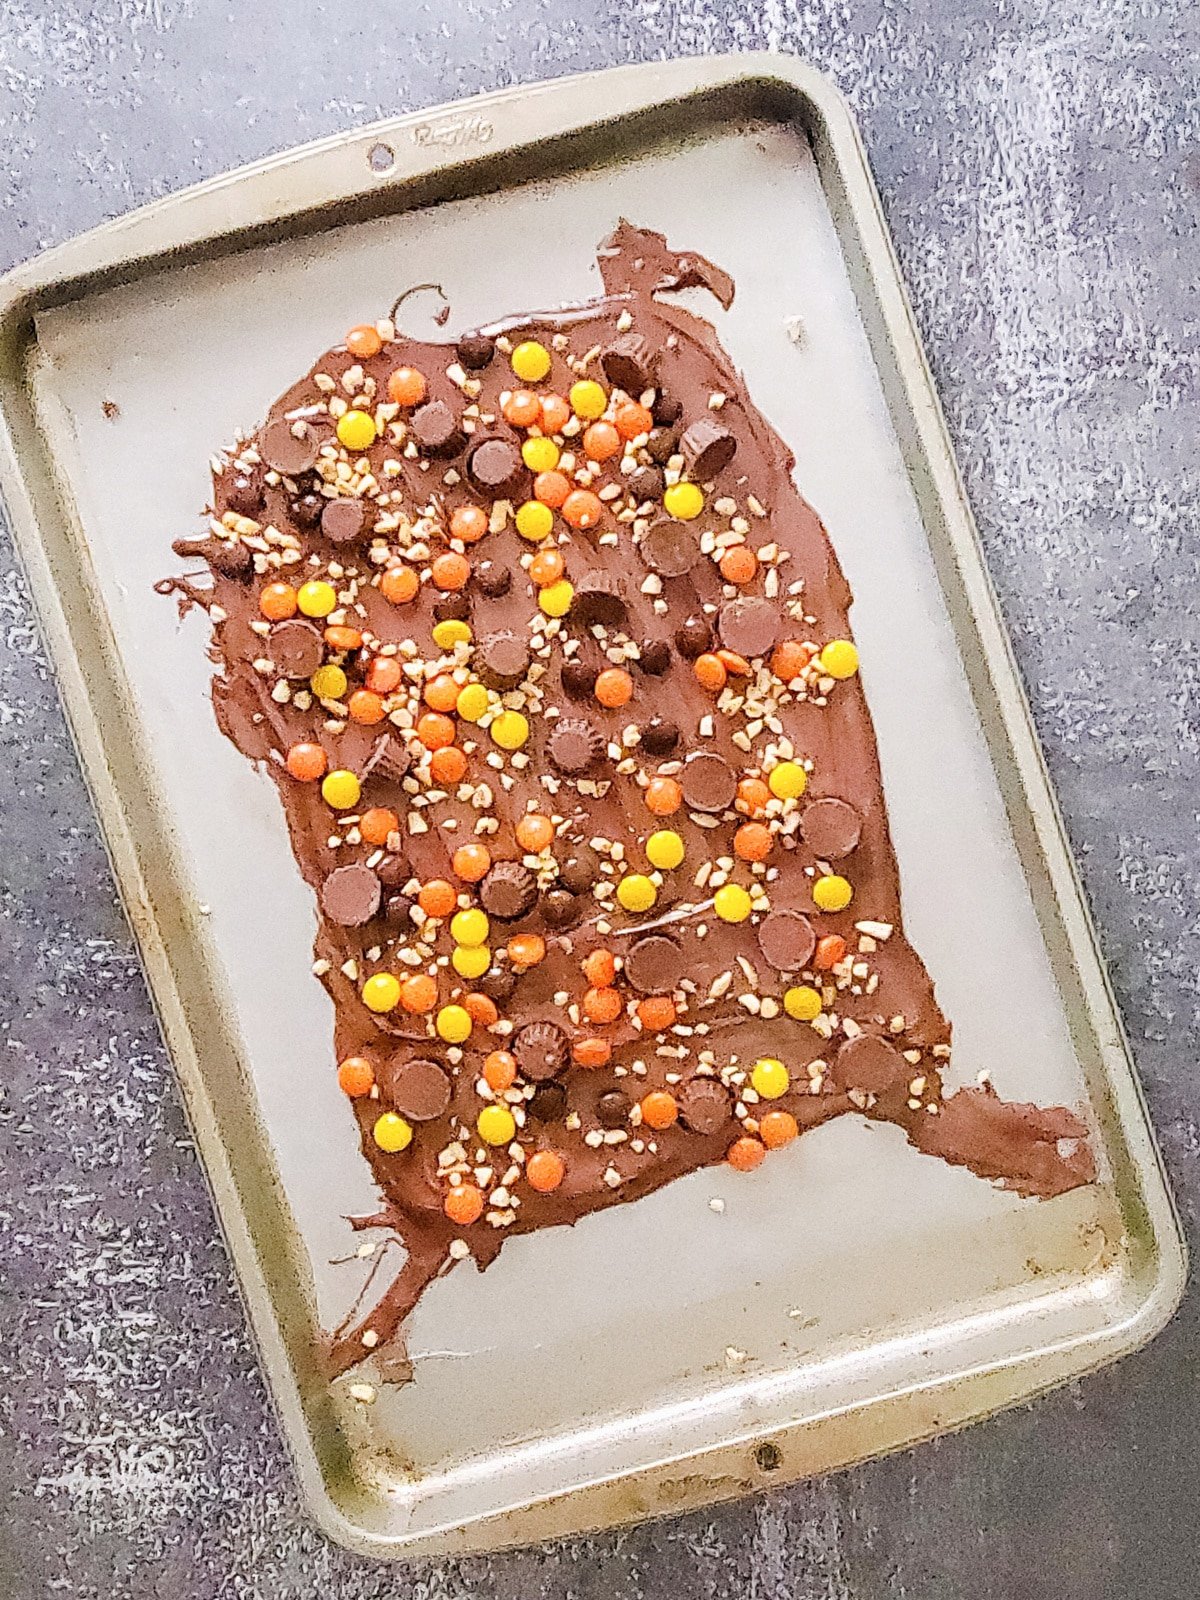 sprinkle candy and nuts onto chocolate